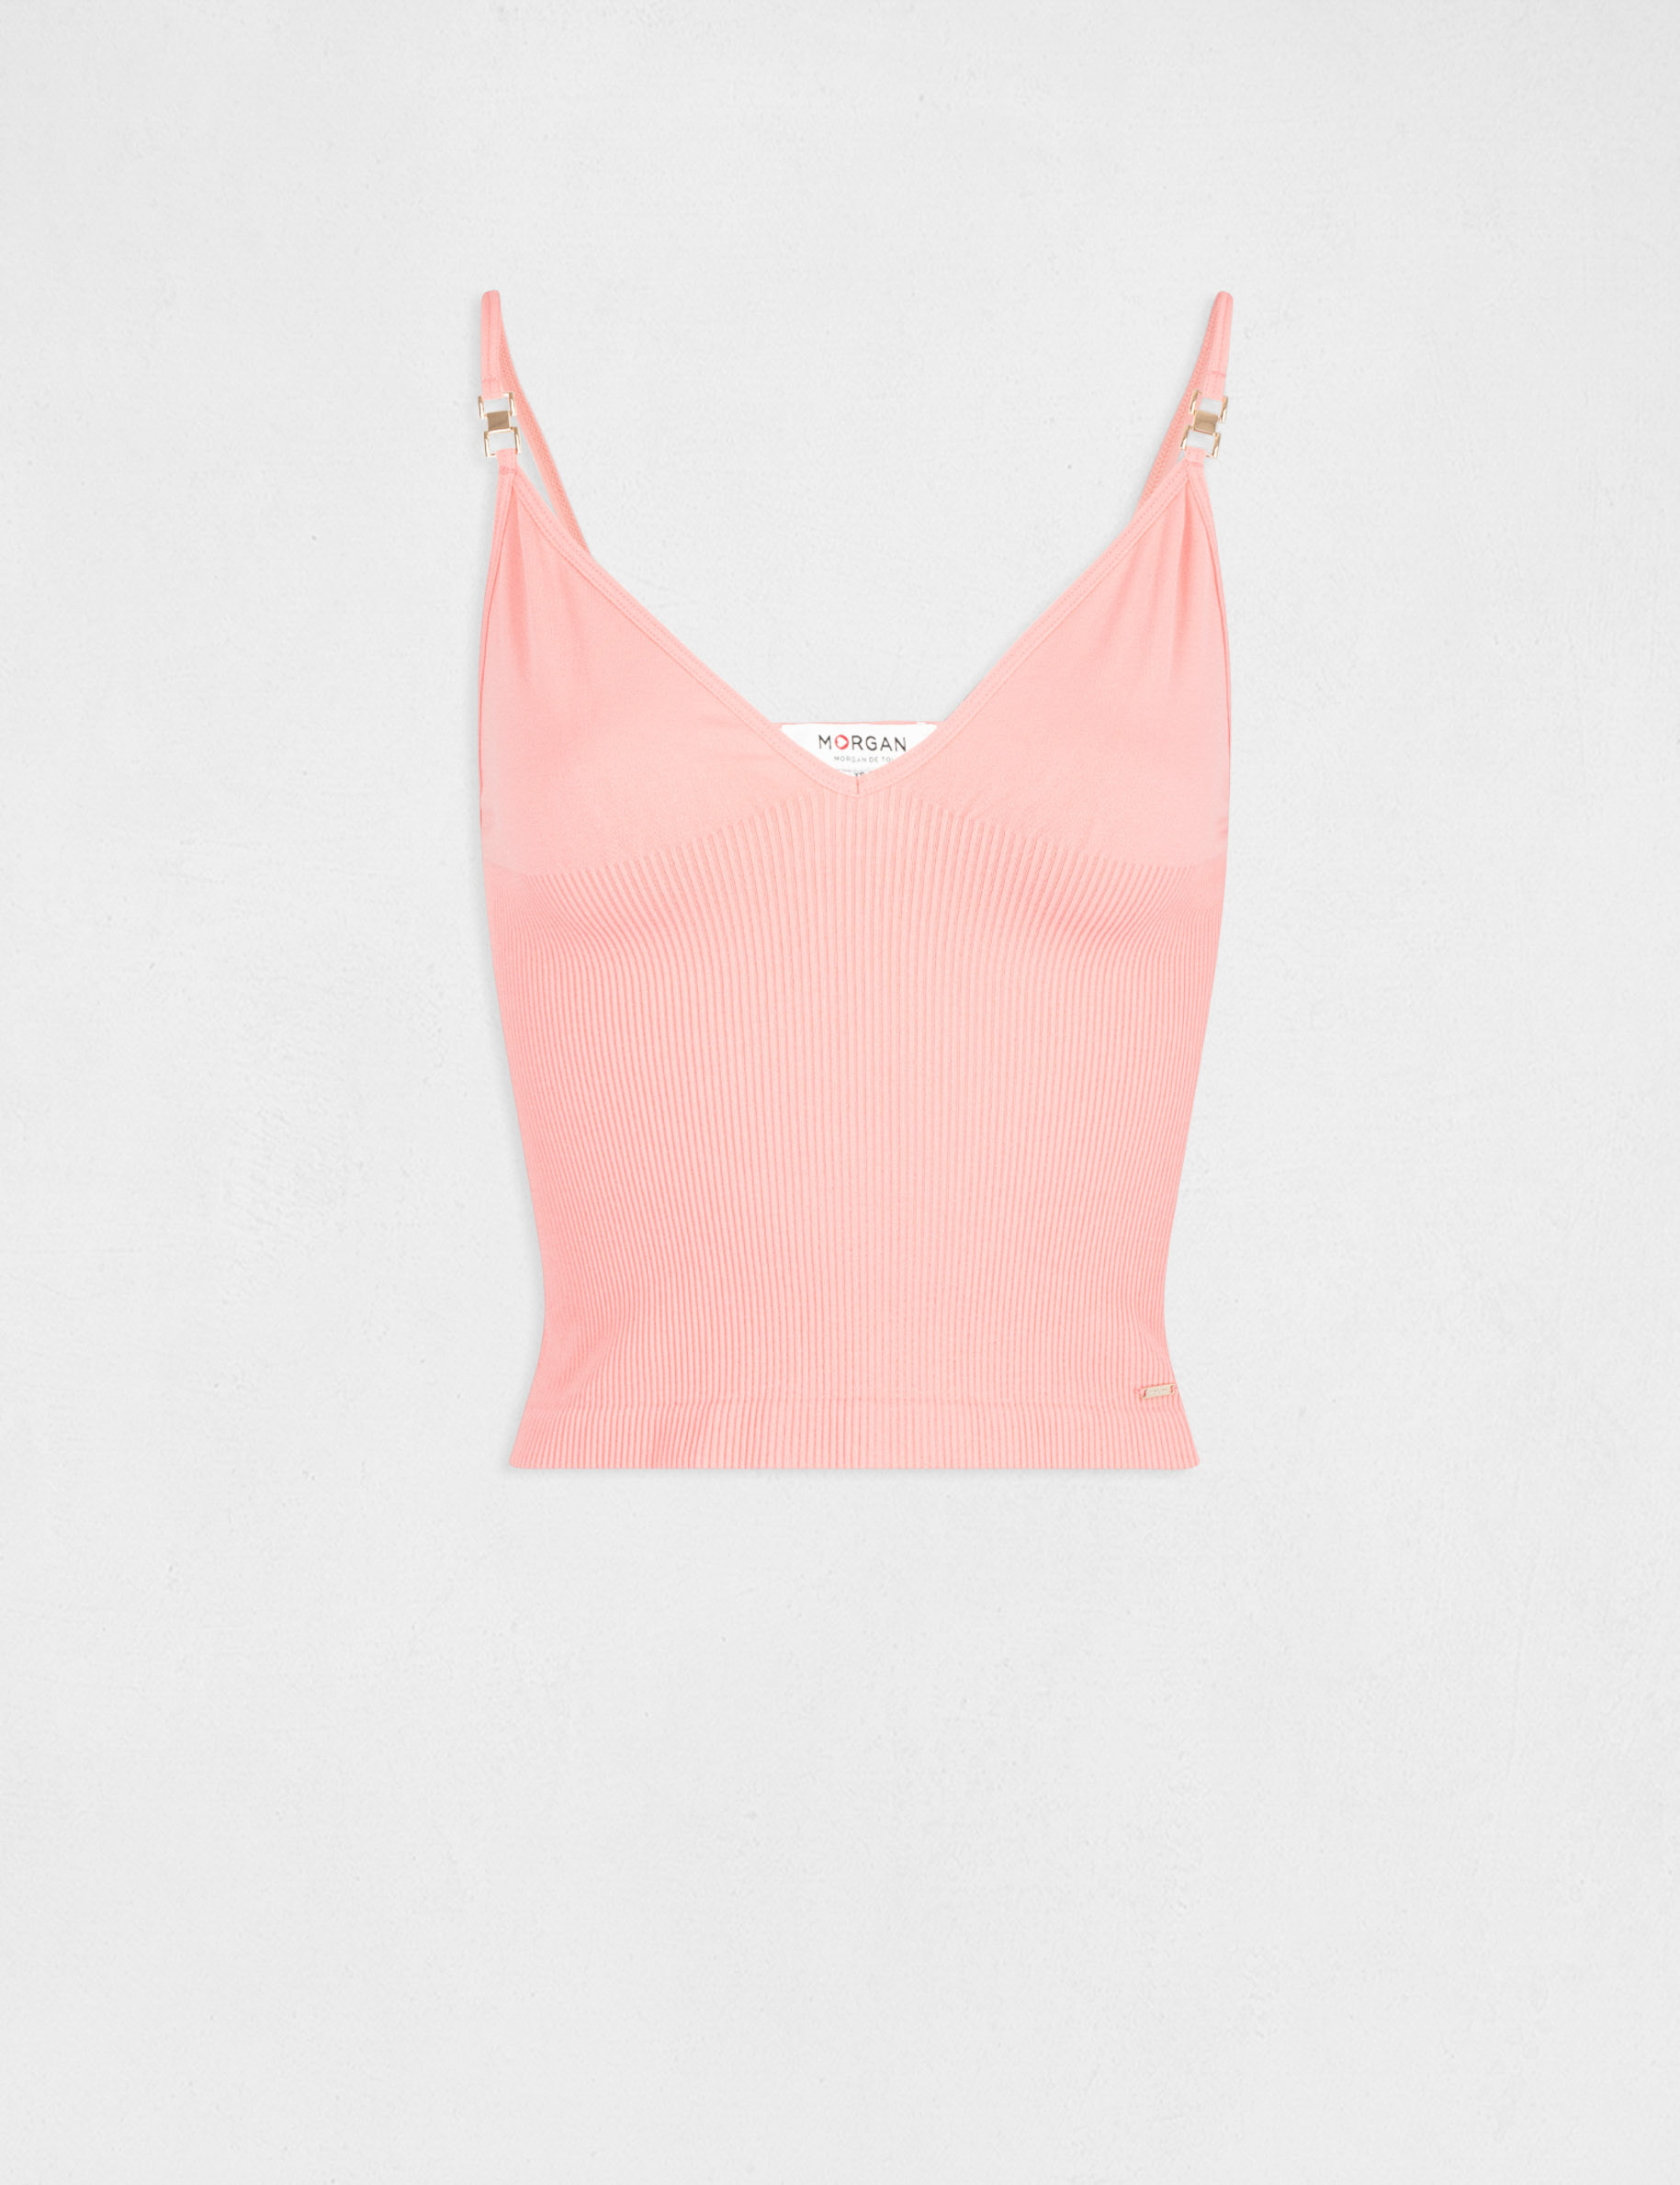 Vest top with thin straps and V-neck coral ladies'